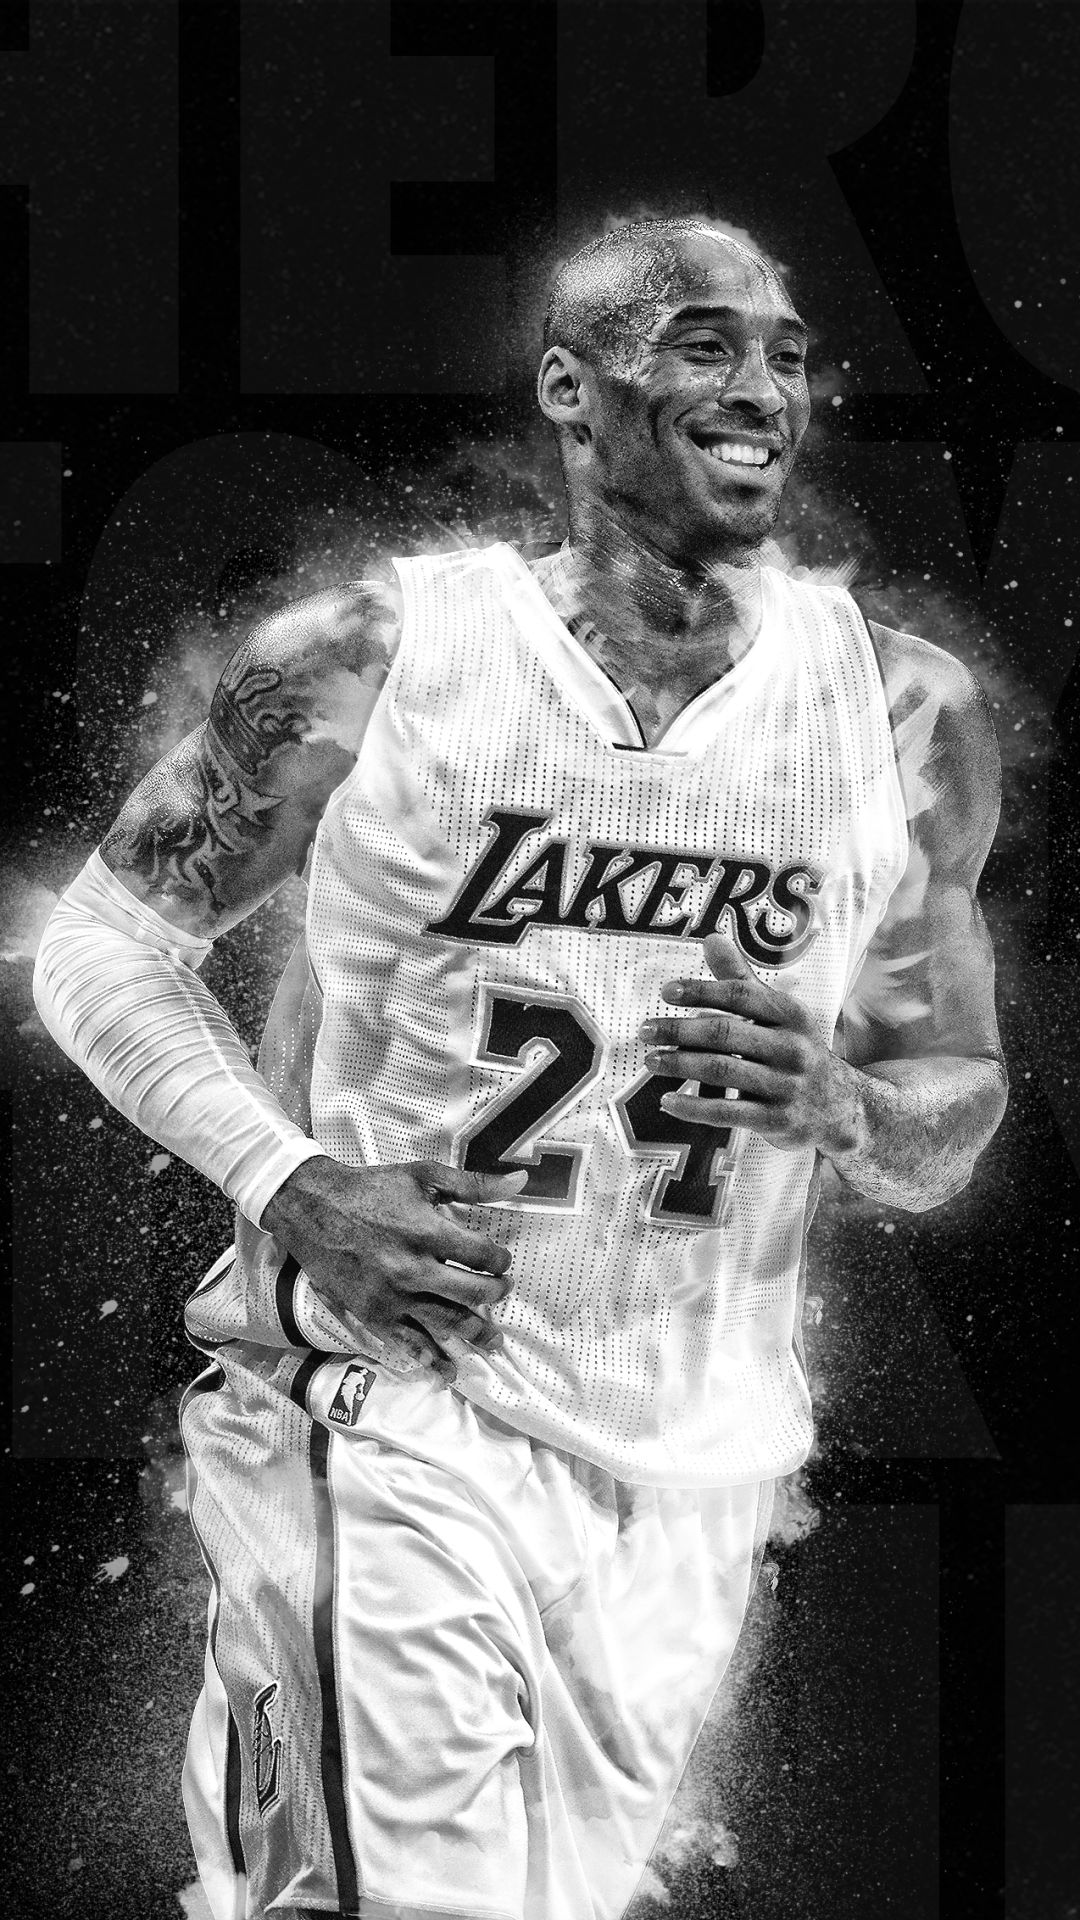 Kobe Bryant wallpaper for iPhone and Android. - Kobe Bryant